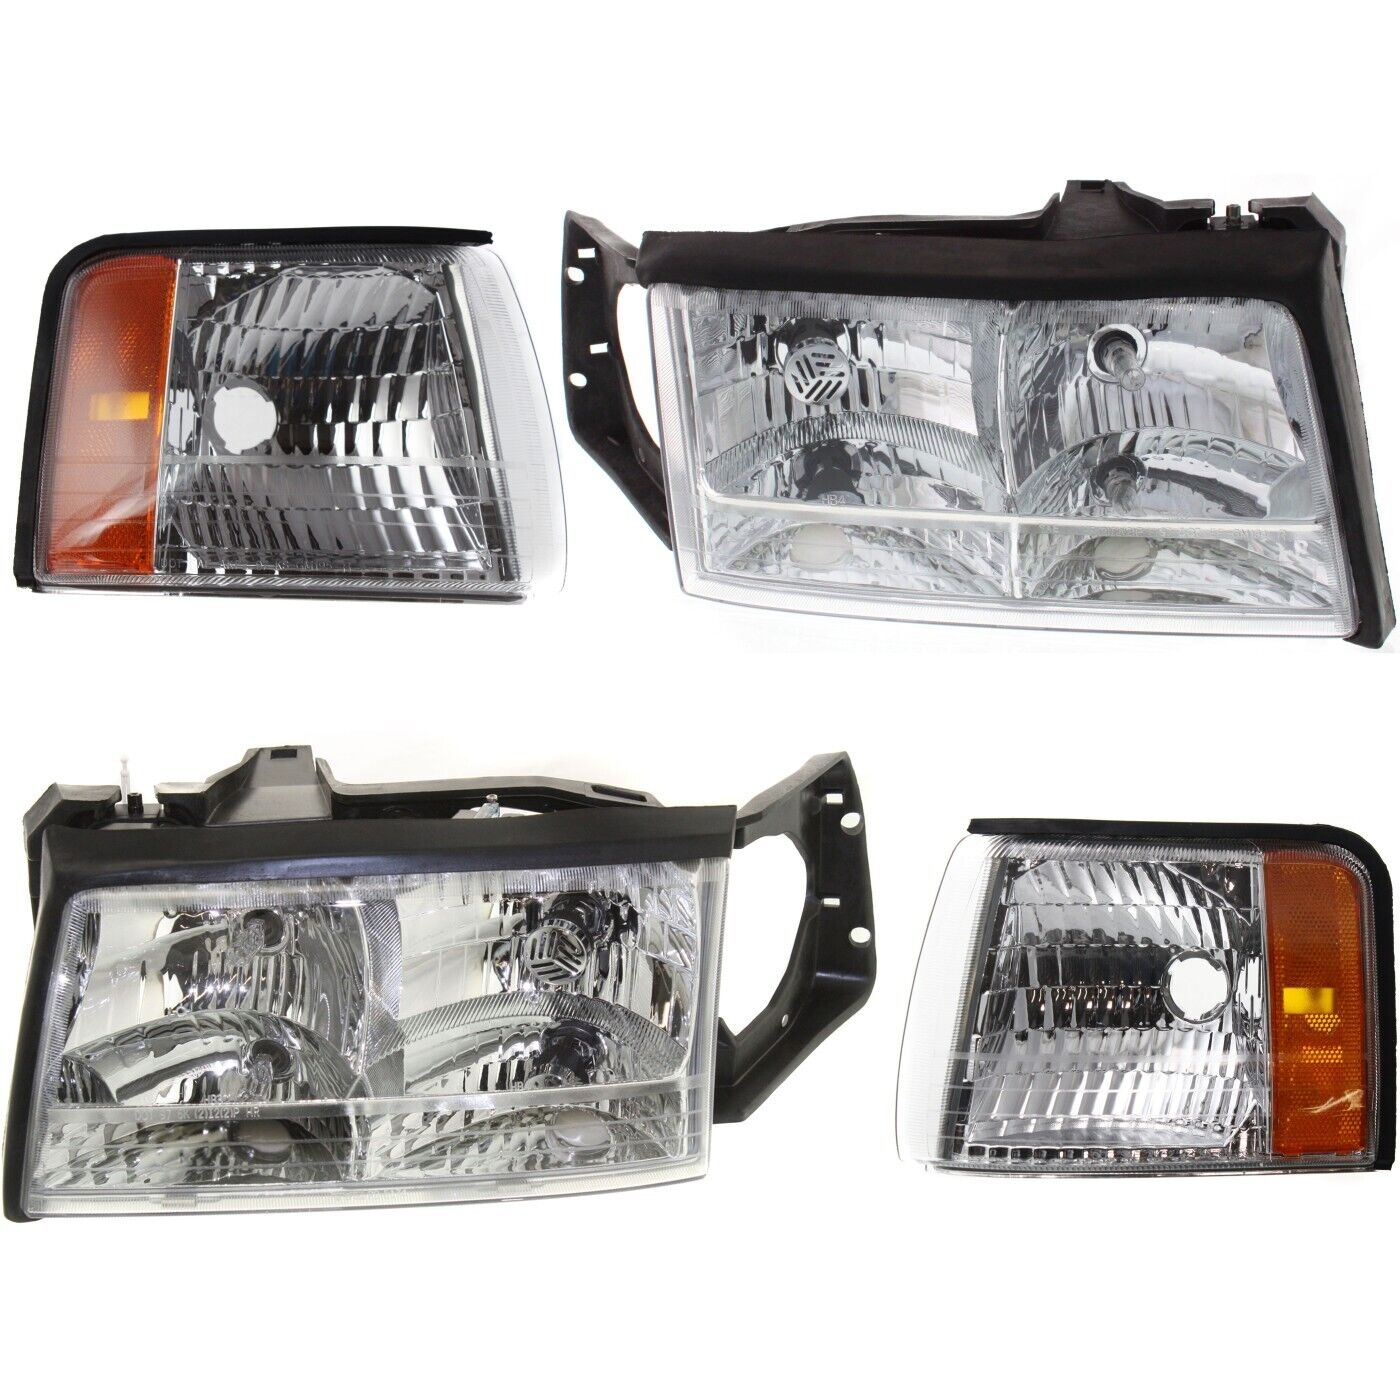 Headlight Kit For 1997-1999 Cadillac DeVille Left and Right With bulbs FWD